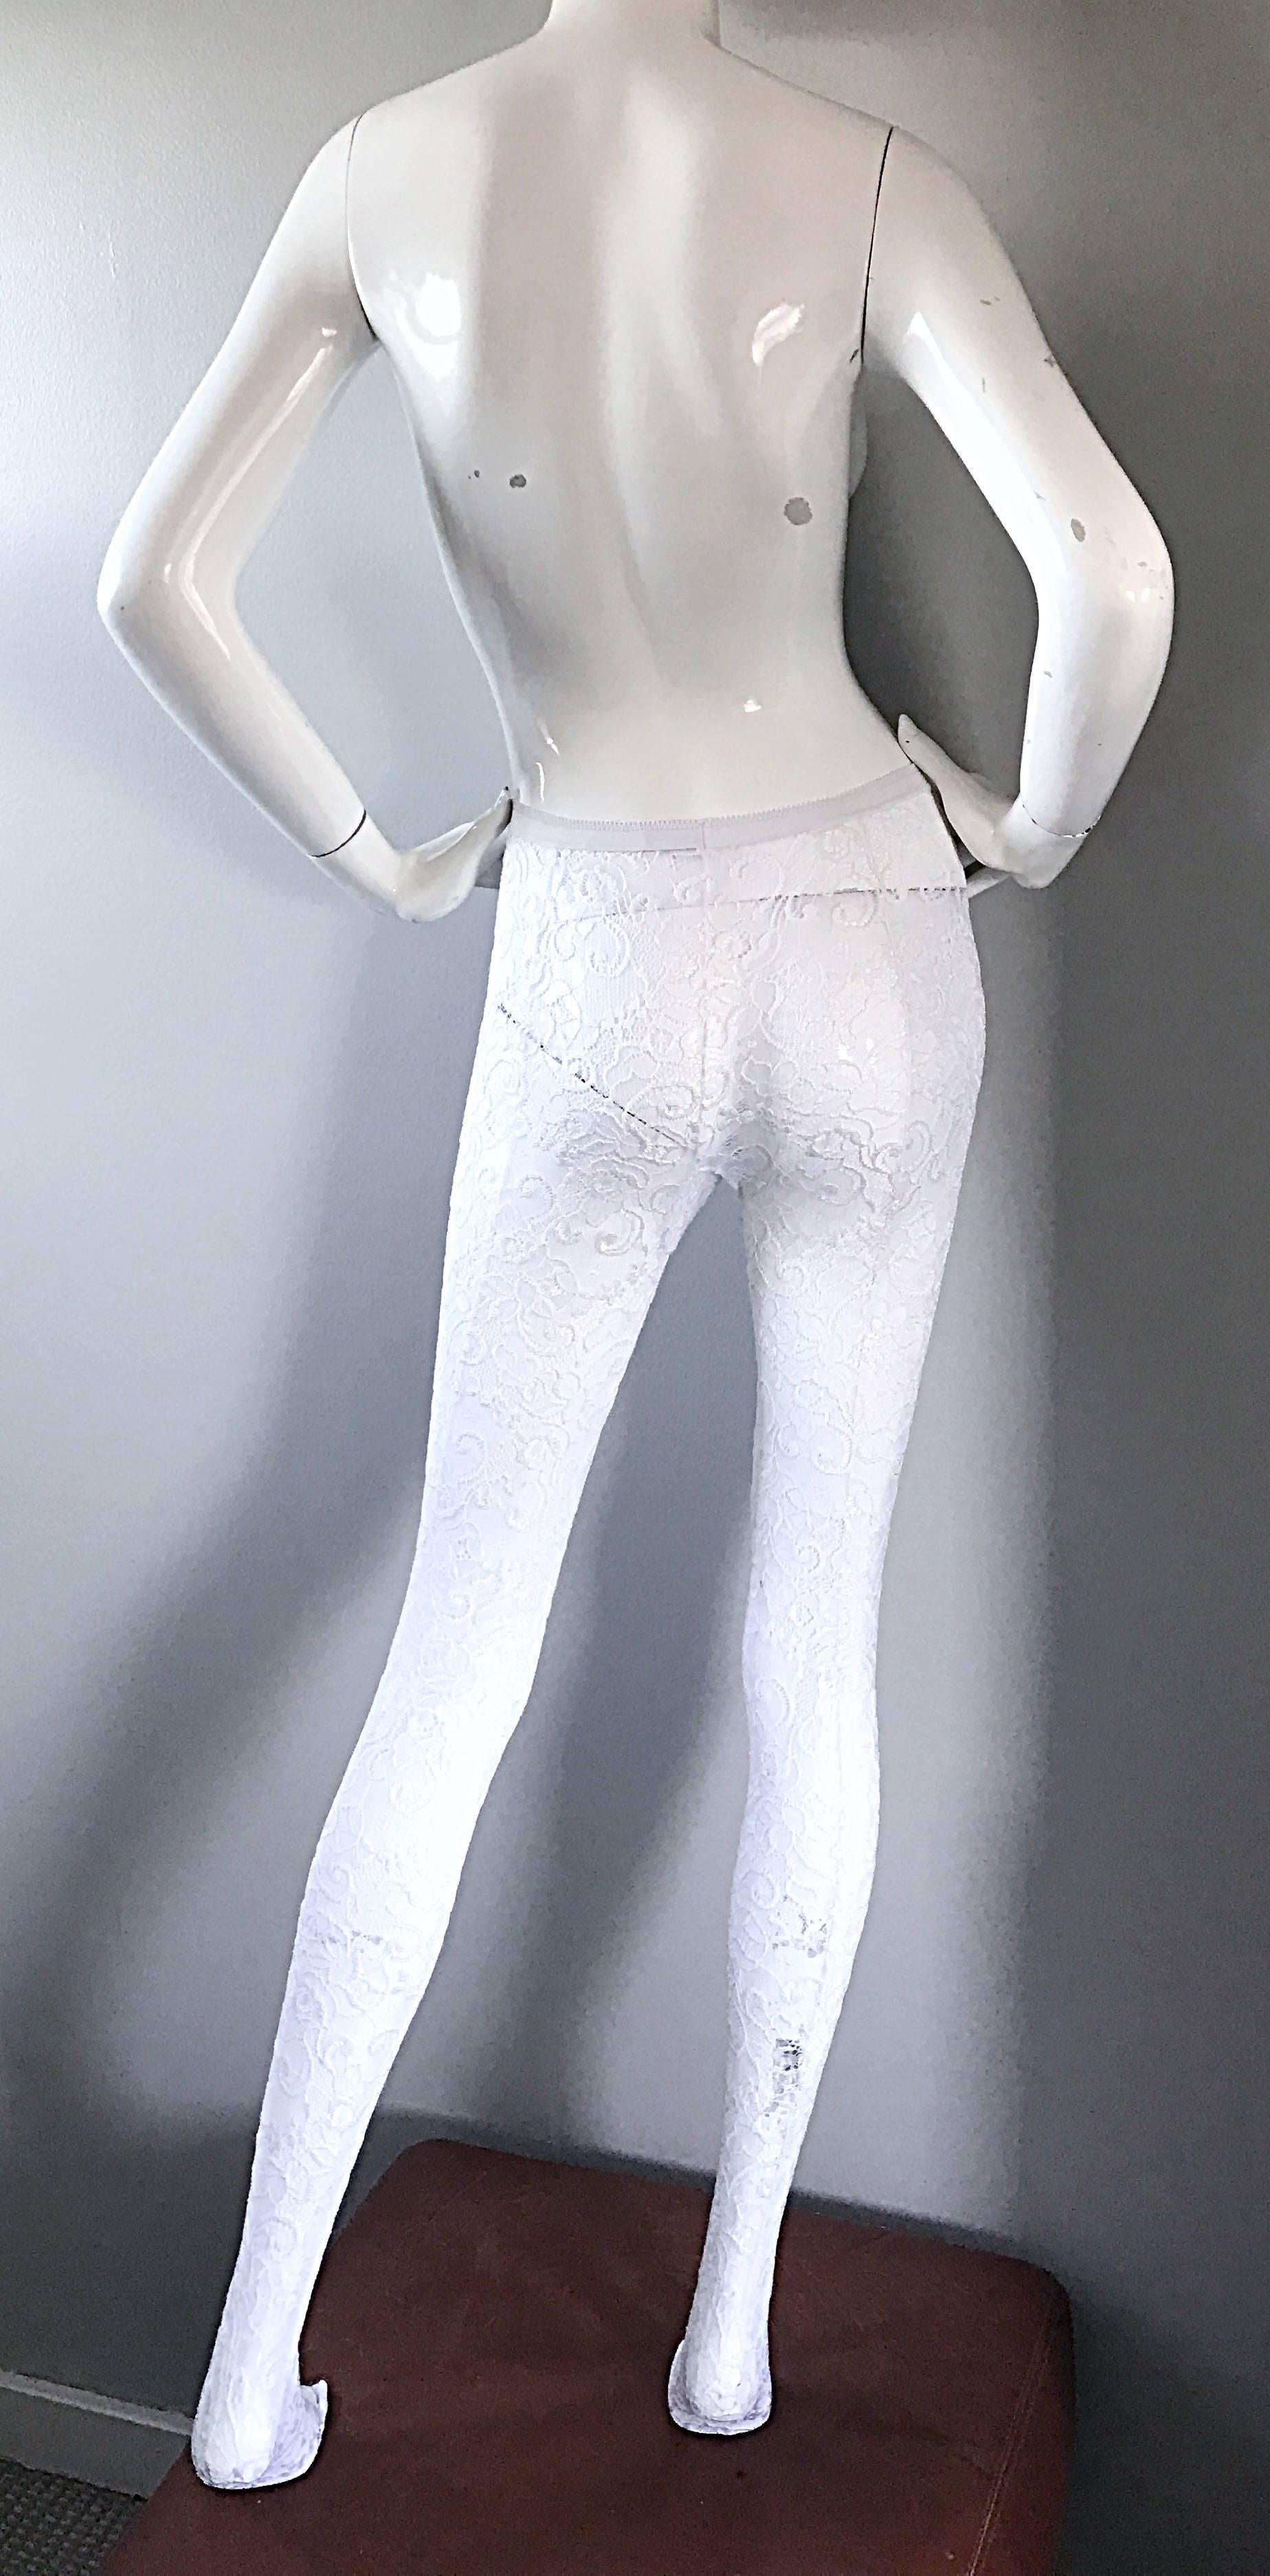 Purple 1990s New Gianni Versace Couture Rare 90s Vintage White Lace Leggings / Tights 